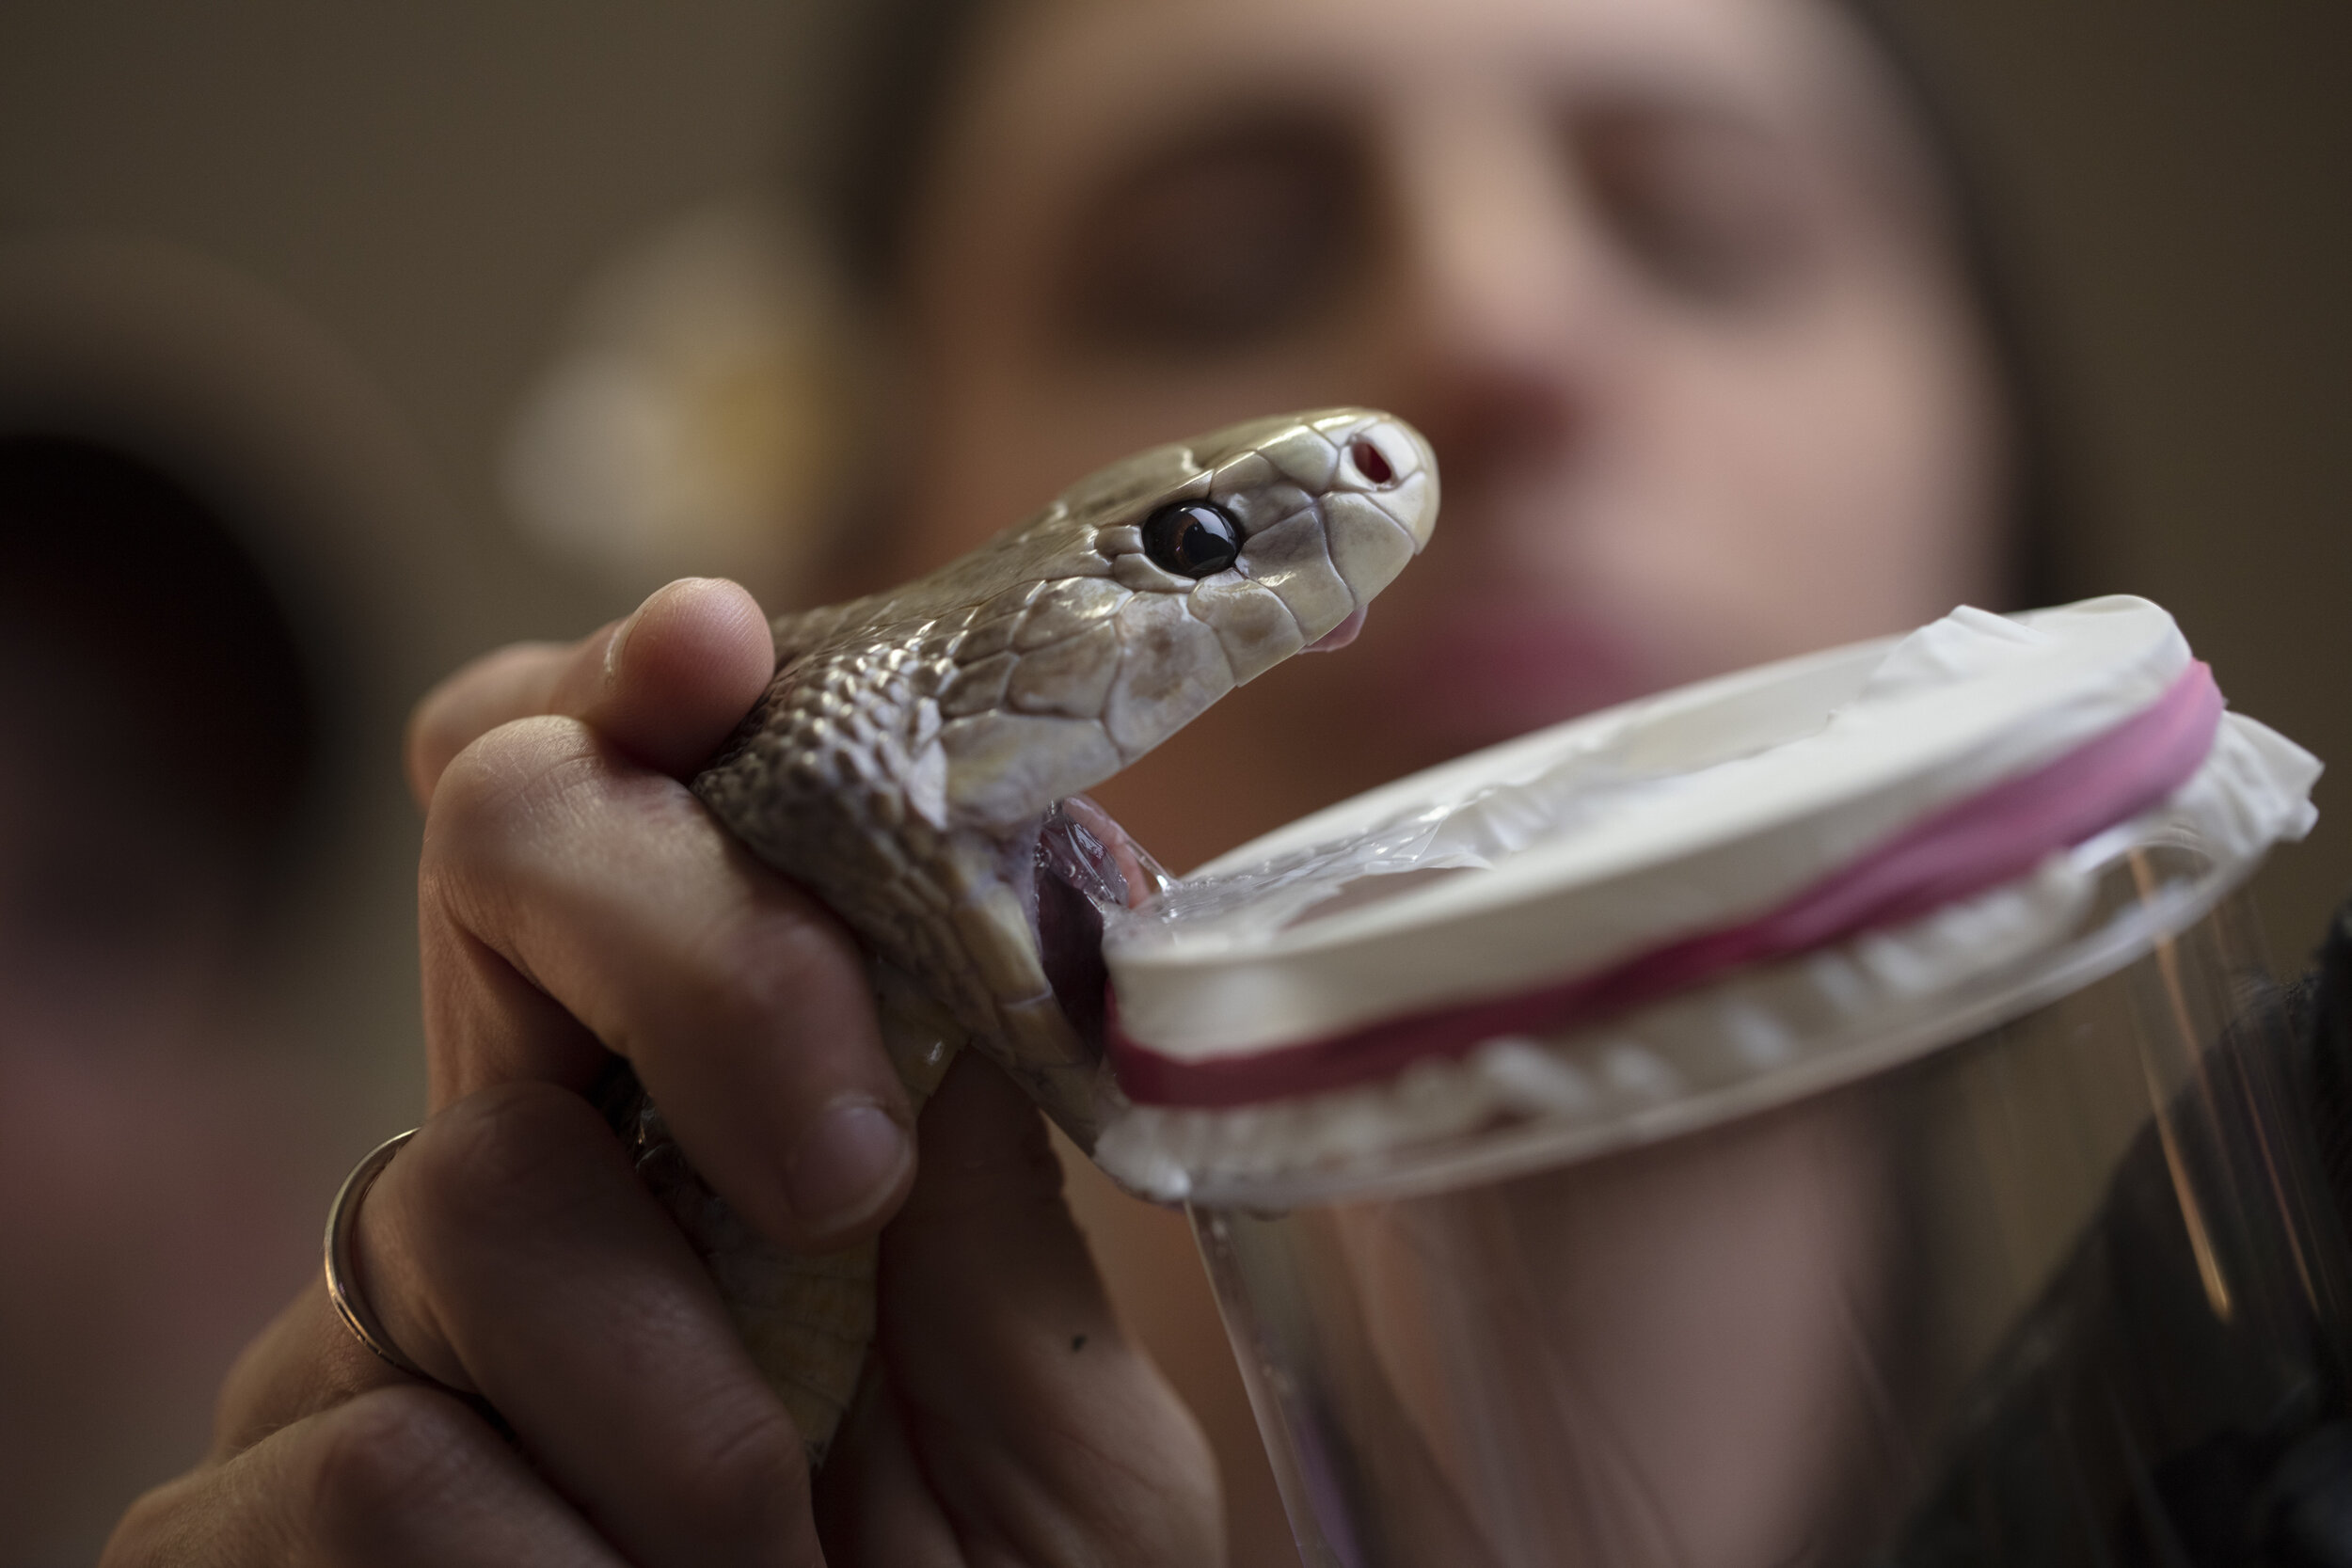  Christina Zdenek, a postdoctoral research fellow at Gehrman Labs University of Qld.Christina is photographed at home in Brisbane where she keeps some of Australias' most venomous snakes stored in her garage. Christina is milking a Coastal Taipan (Ox